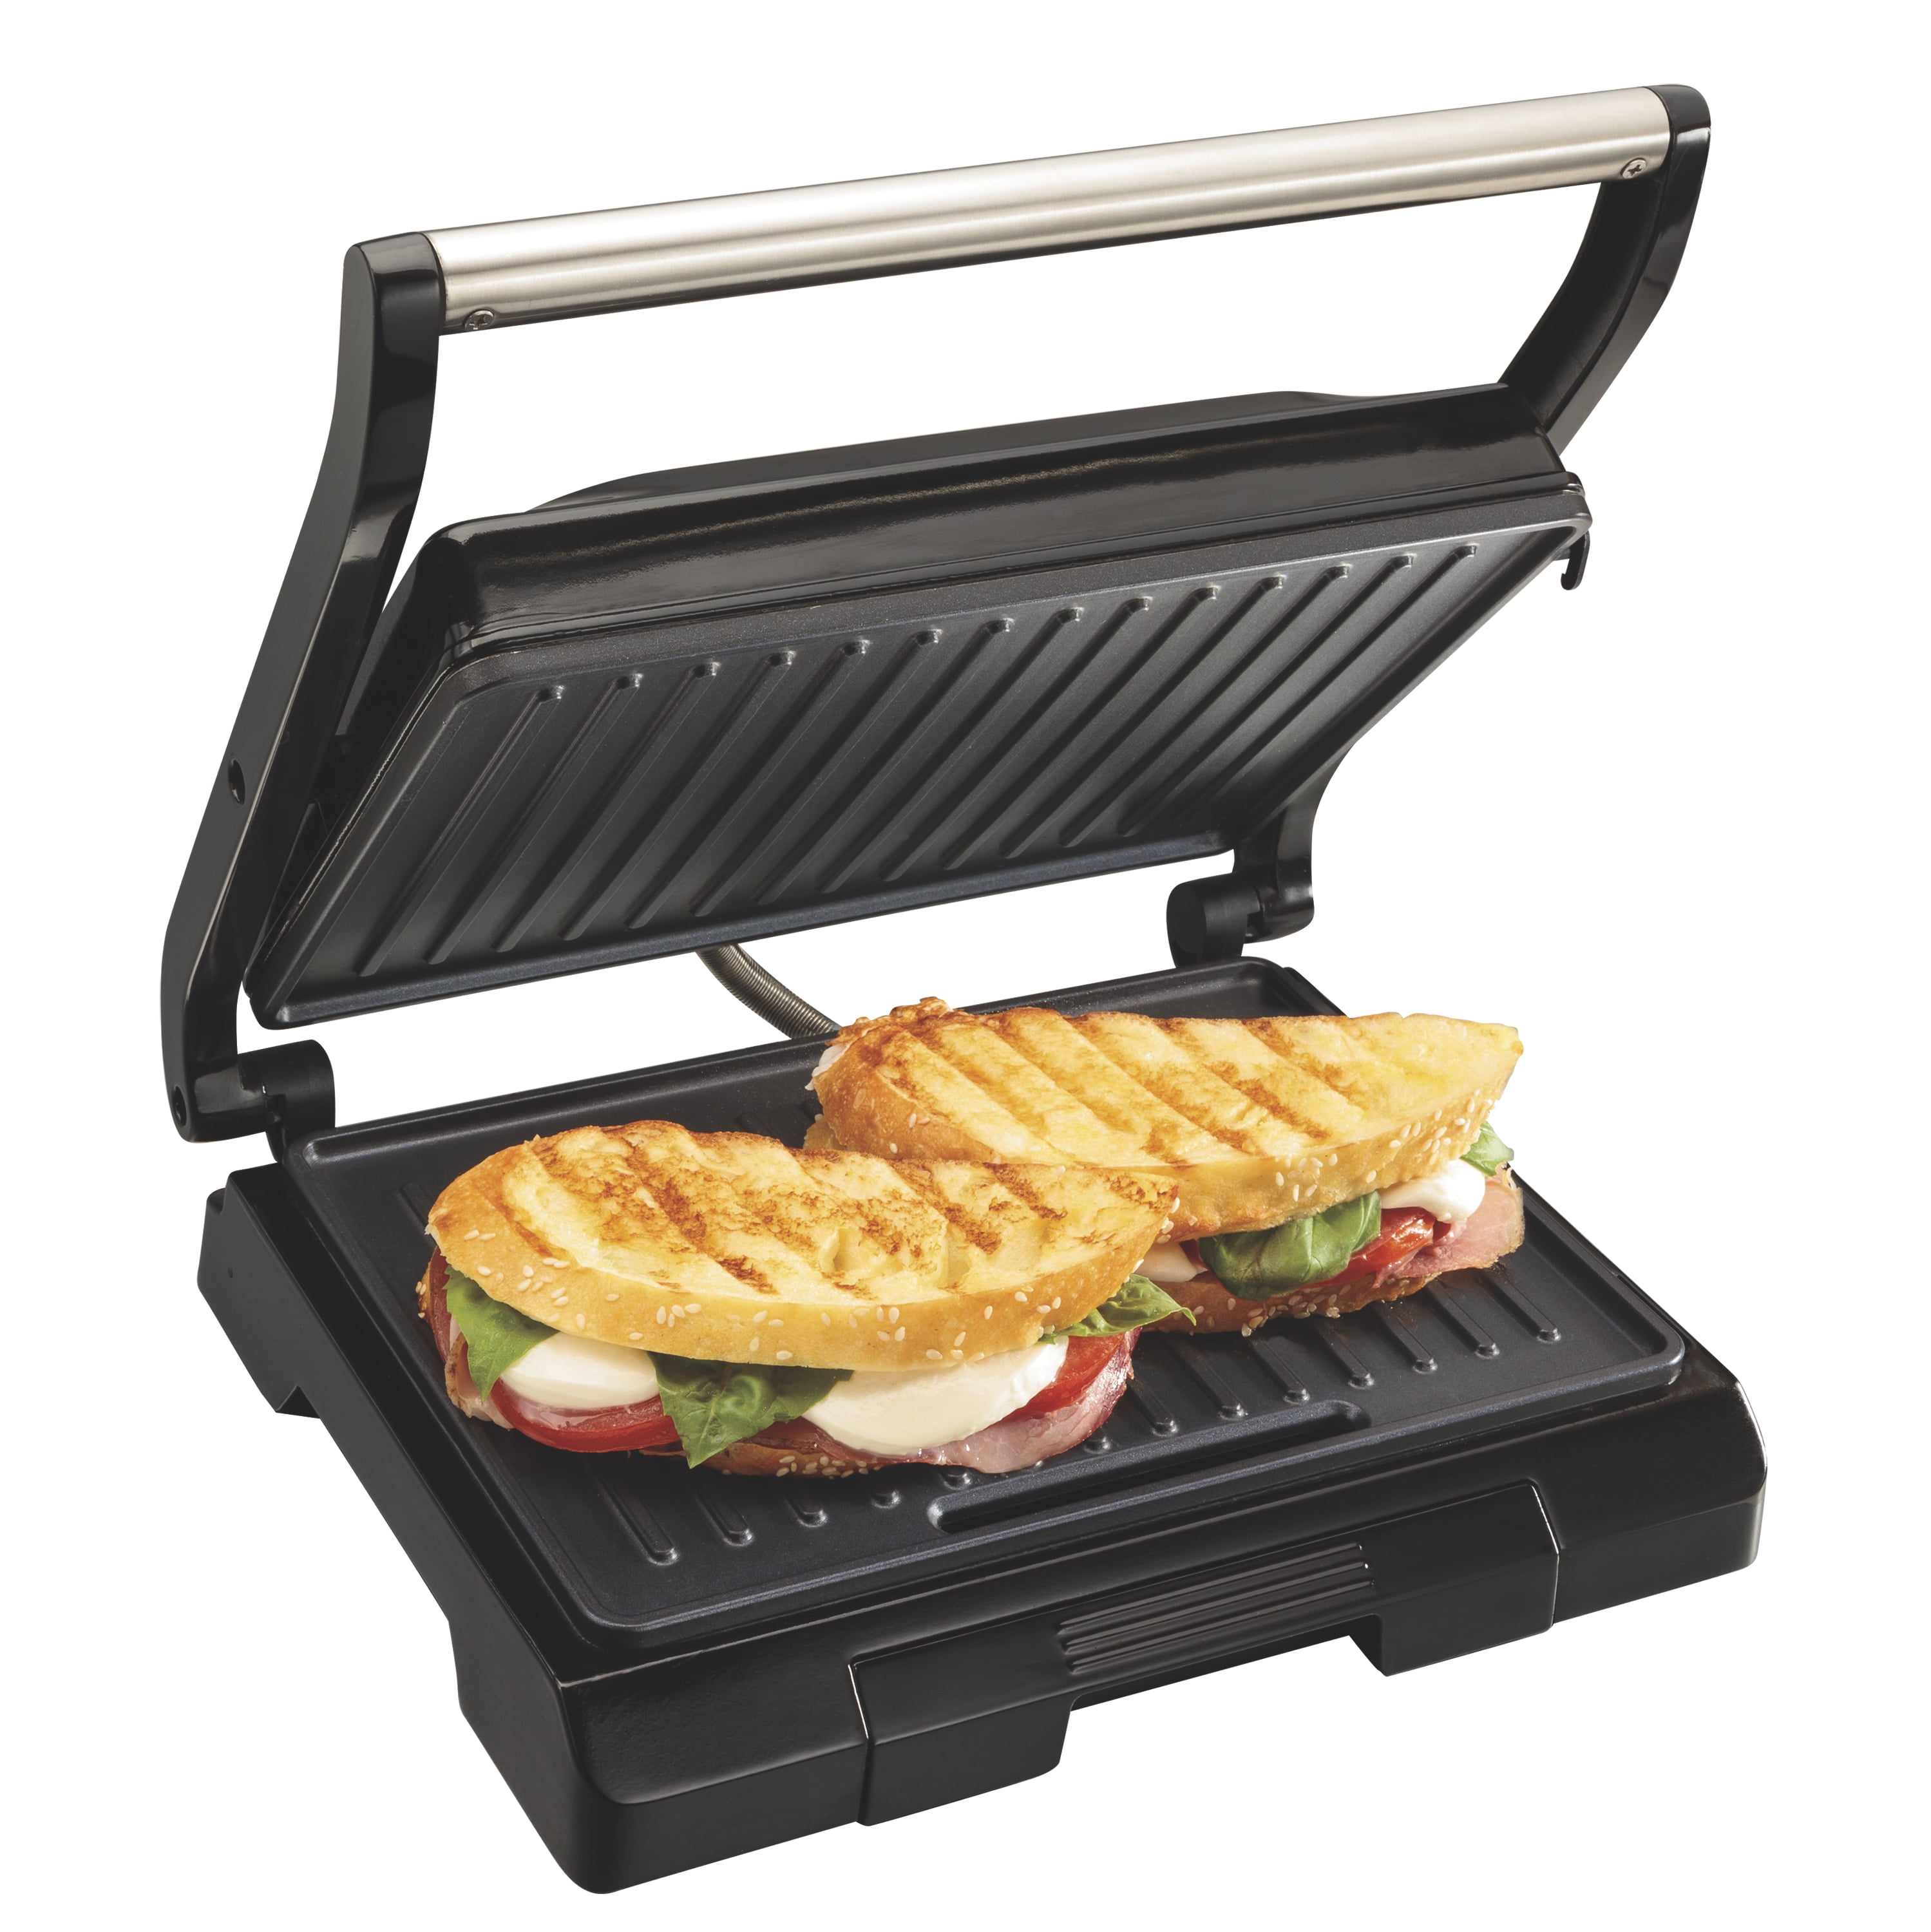  OSTBA Panini Press, 1200W Sandwich Maker, XXL Electric Indoor  Grill with Nonstick Plates, Indicator Lights, Opens 180 Degrees, Easy to  Clean: Home & Kitchen